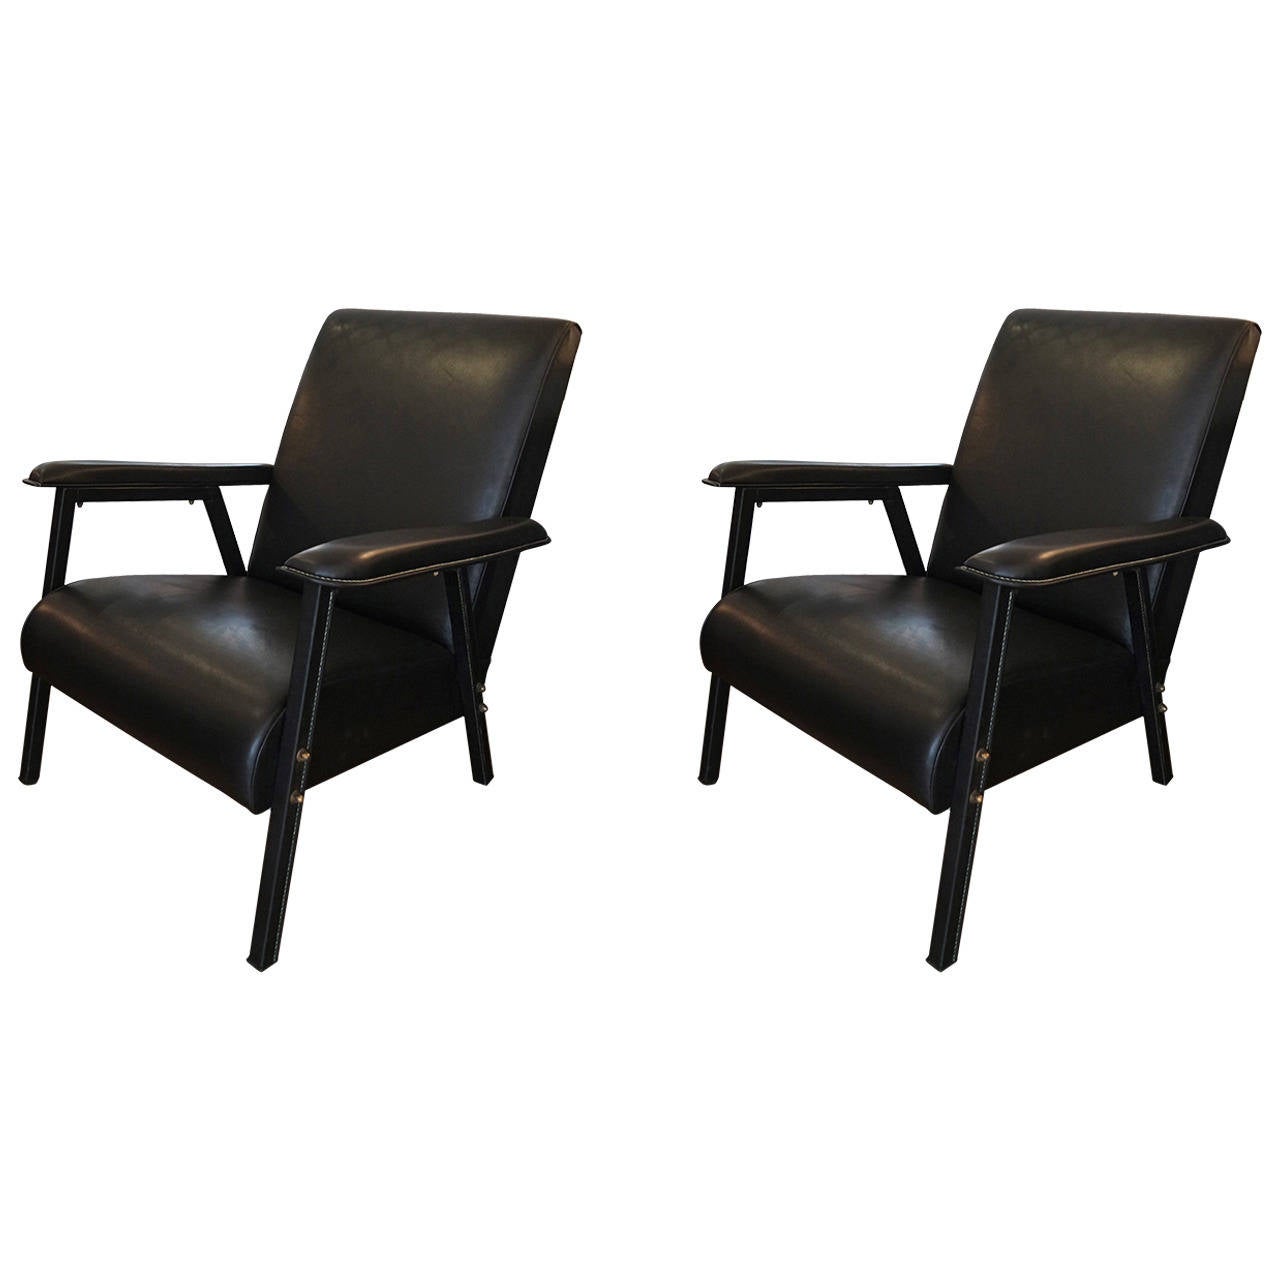 Jacques Quinet armchairs, 1950s, offered by Galerie Edouard de la Marque